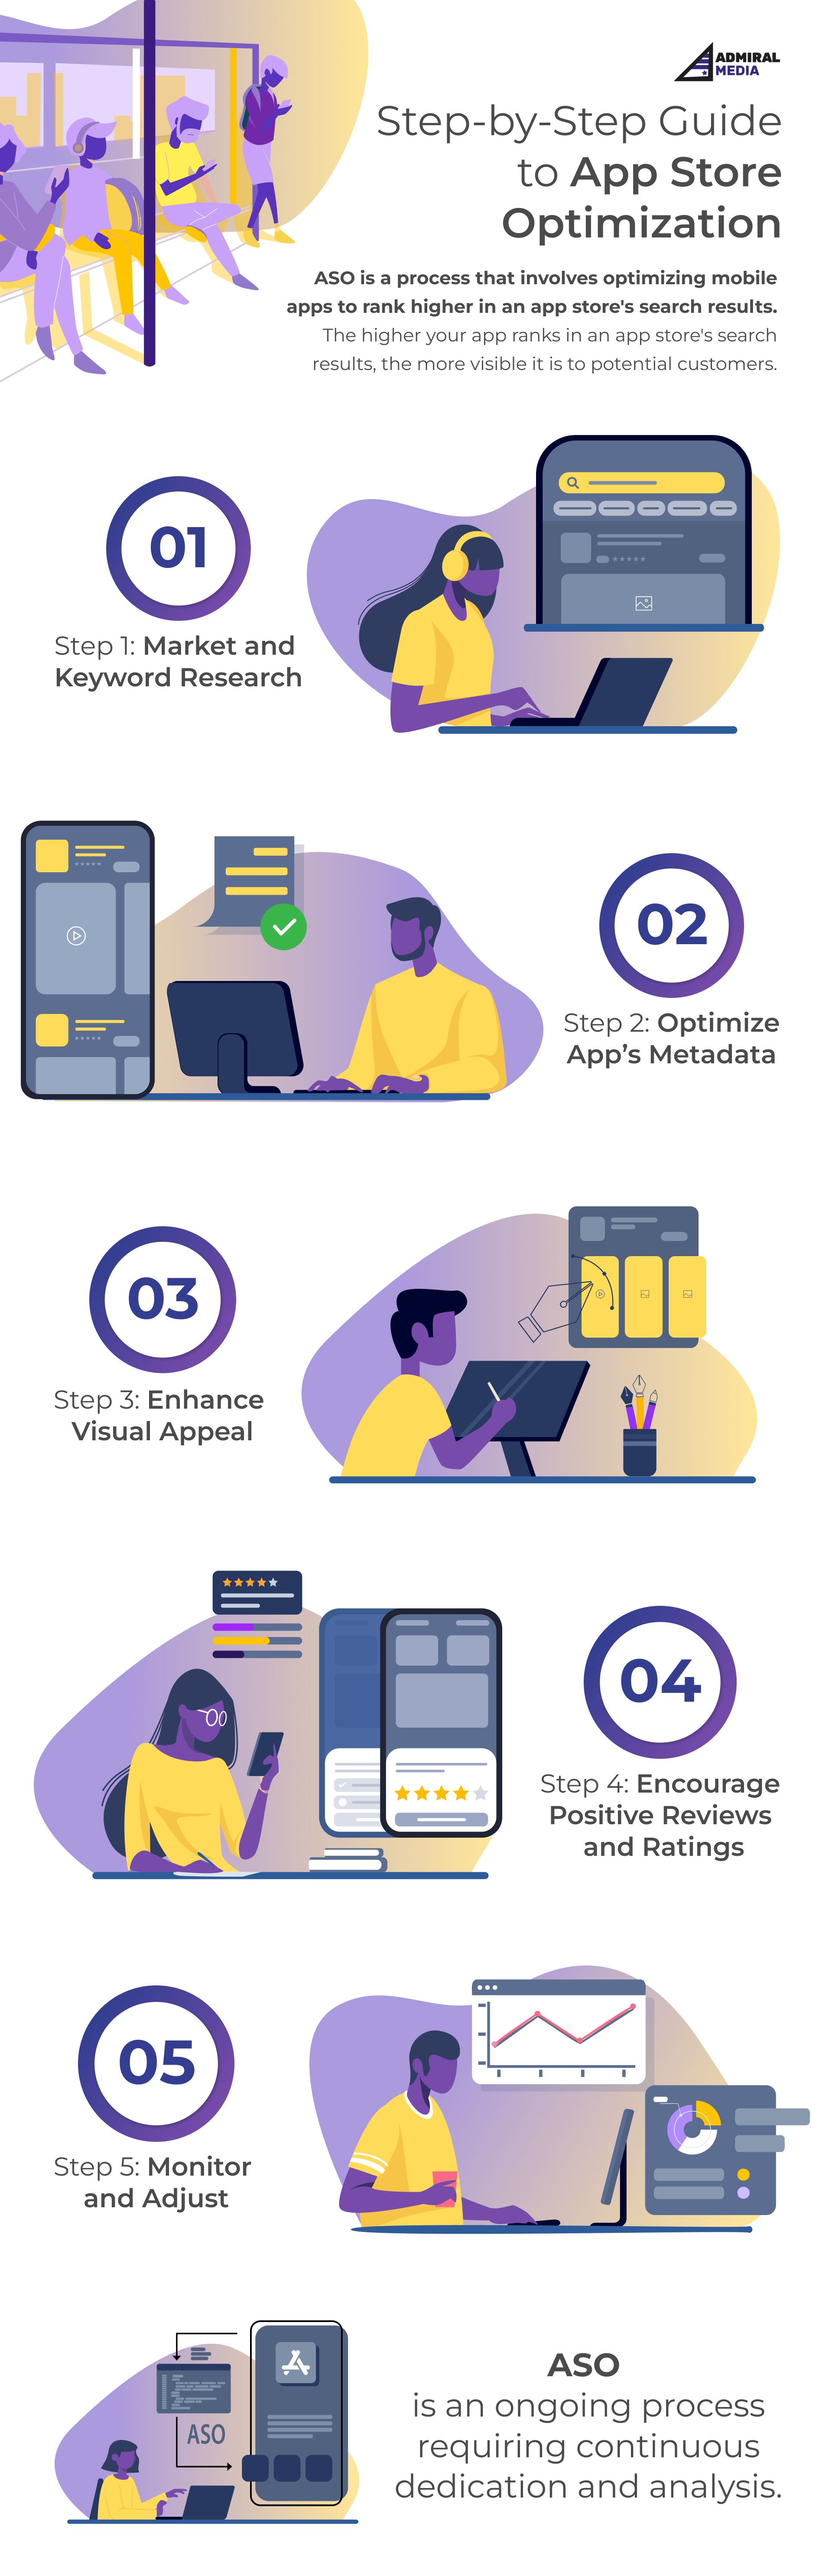 Infographic summarizing key elements of App Store Optimization (ASO), including the importance of optimizing app titles, keywords, and descriptions, the significance of user engagement metrics, a step-by-step ASO guide, and tips for avoiding common ASO pitfalls.